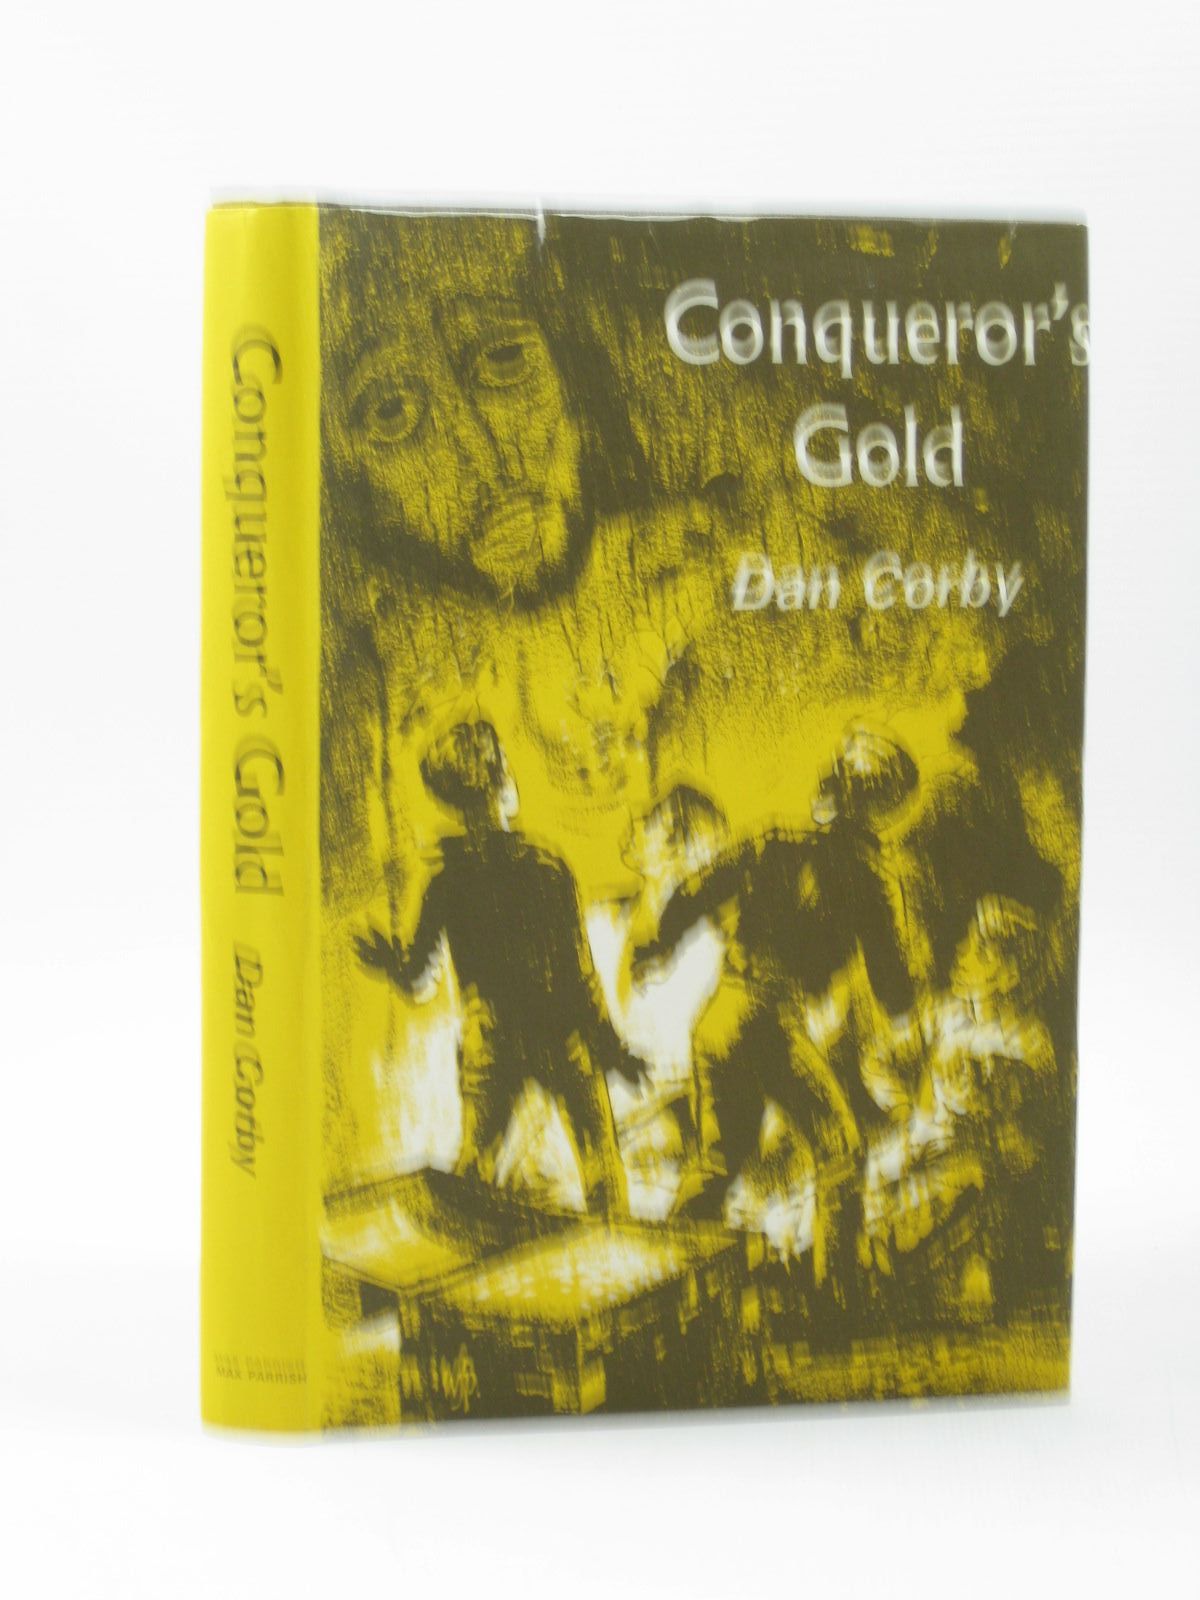 Photo of CONQUEROR'S GOLD written by Corby, Dan published by Max Parrish (STOCK CODE: 1502904)  for sale by Stella & Rose's Books